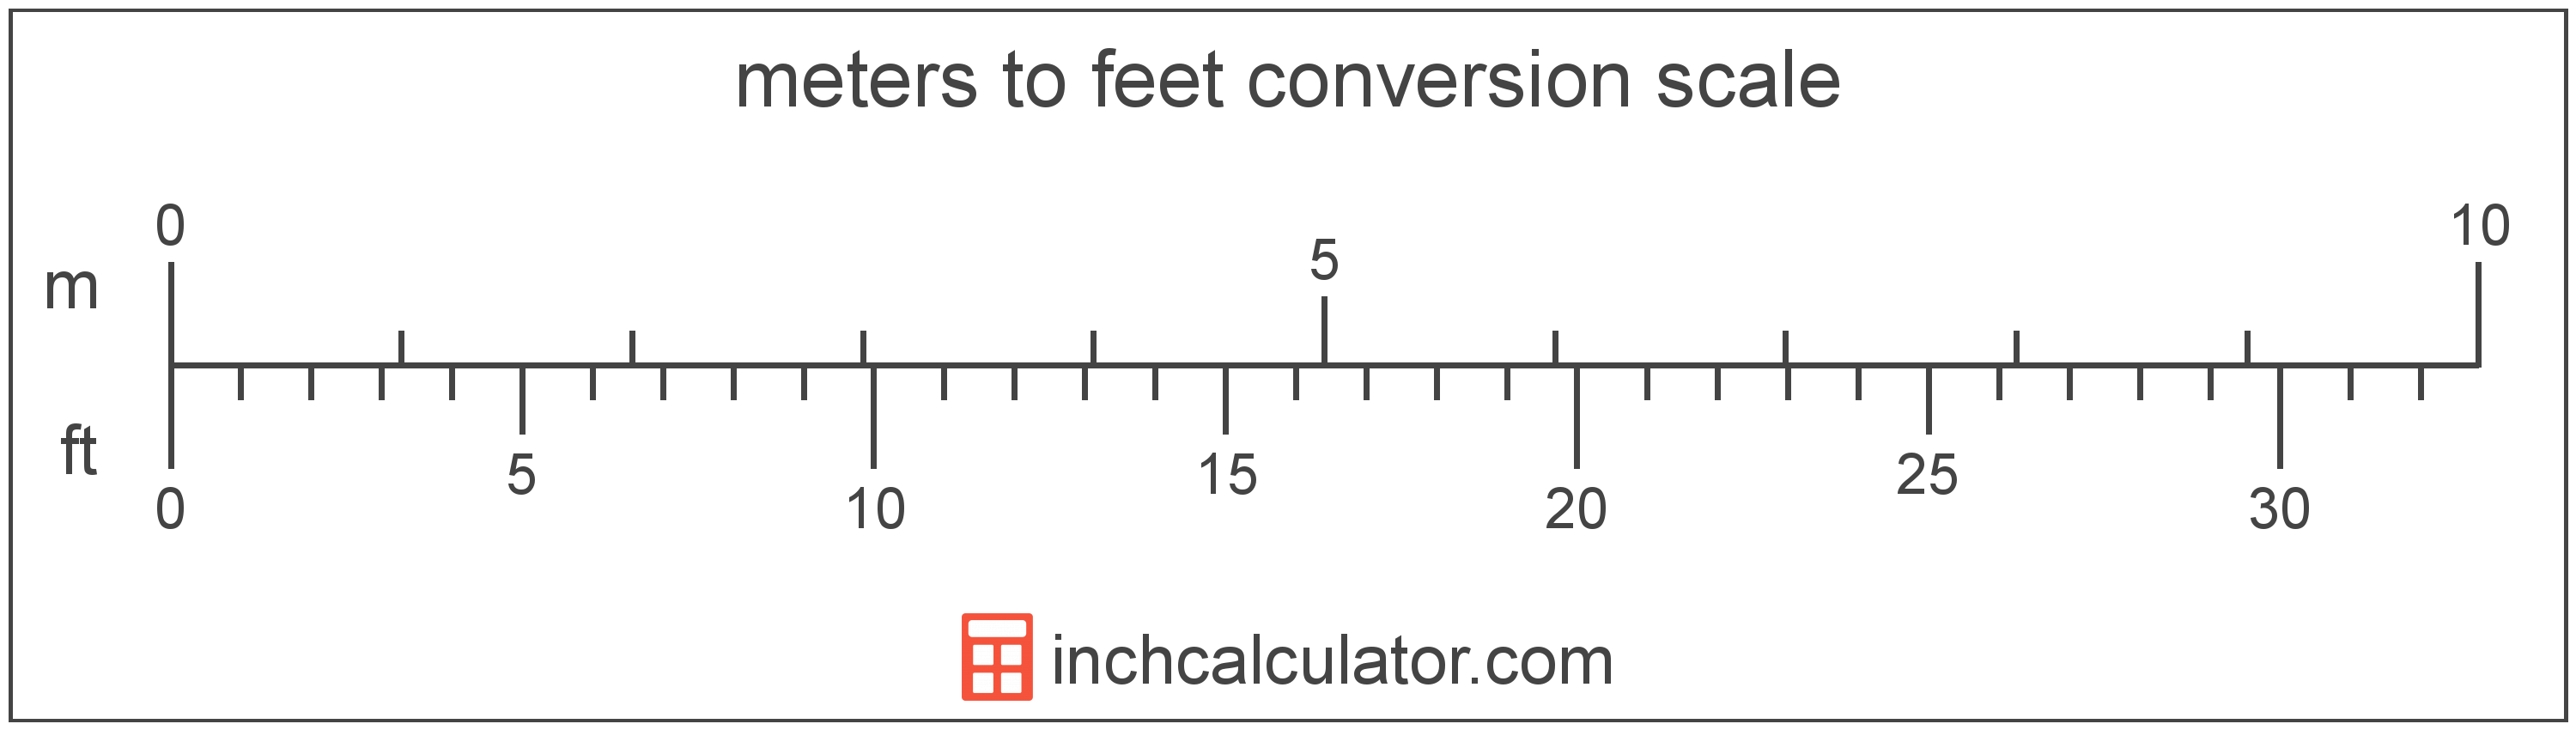 conversion scale showing feet and equivalent meters length values